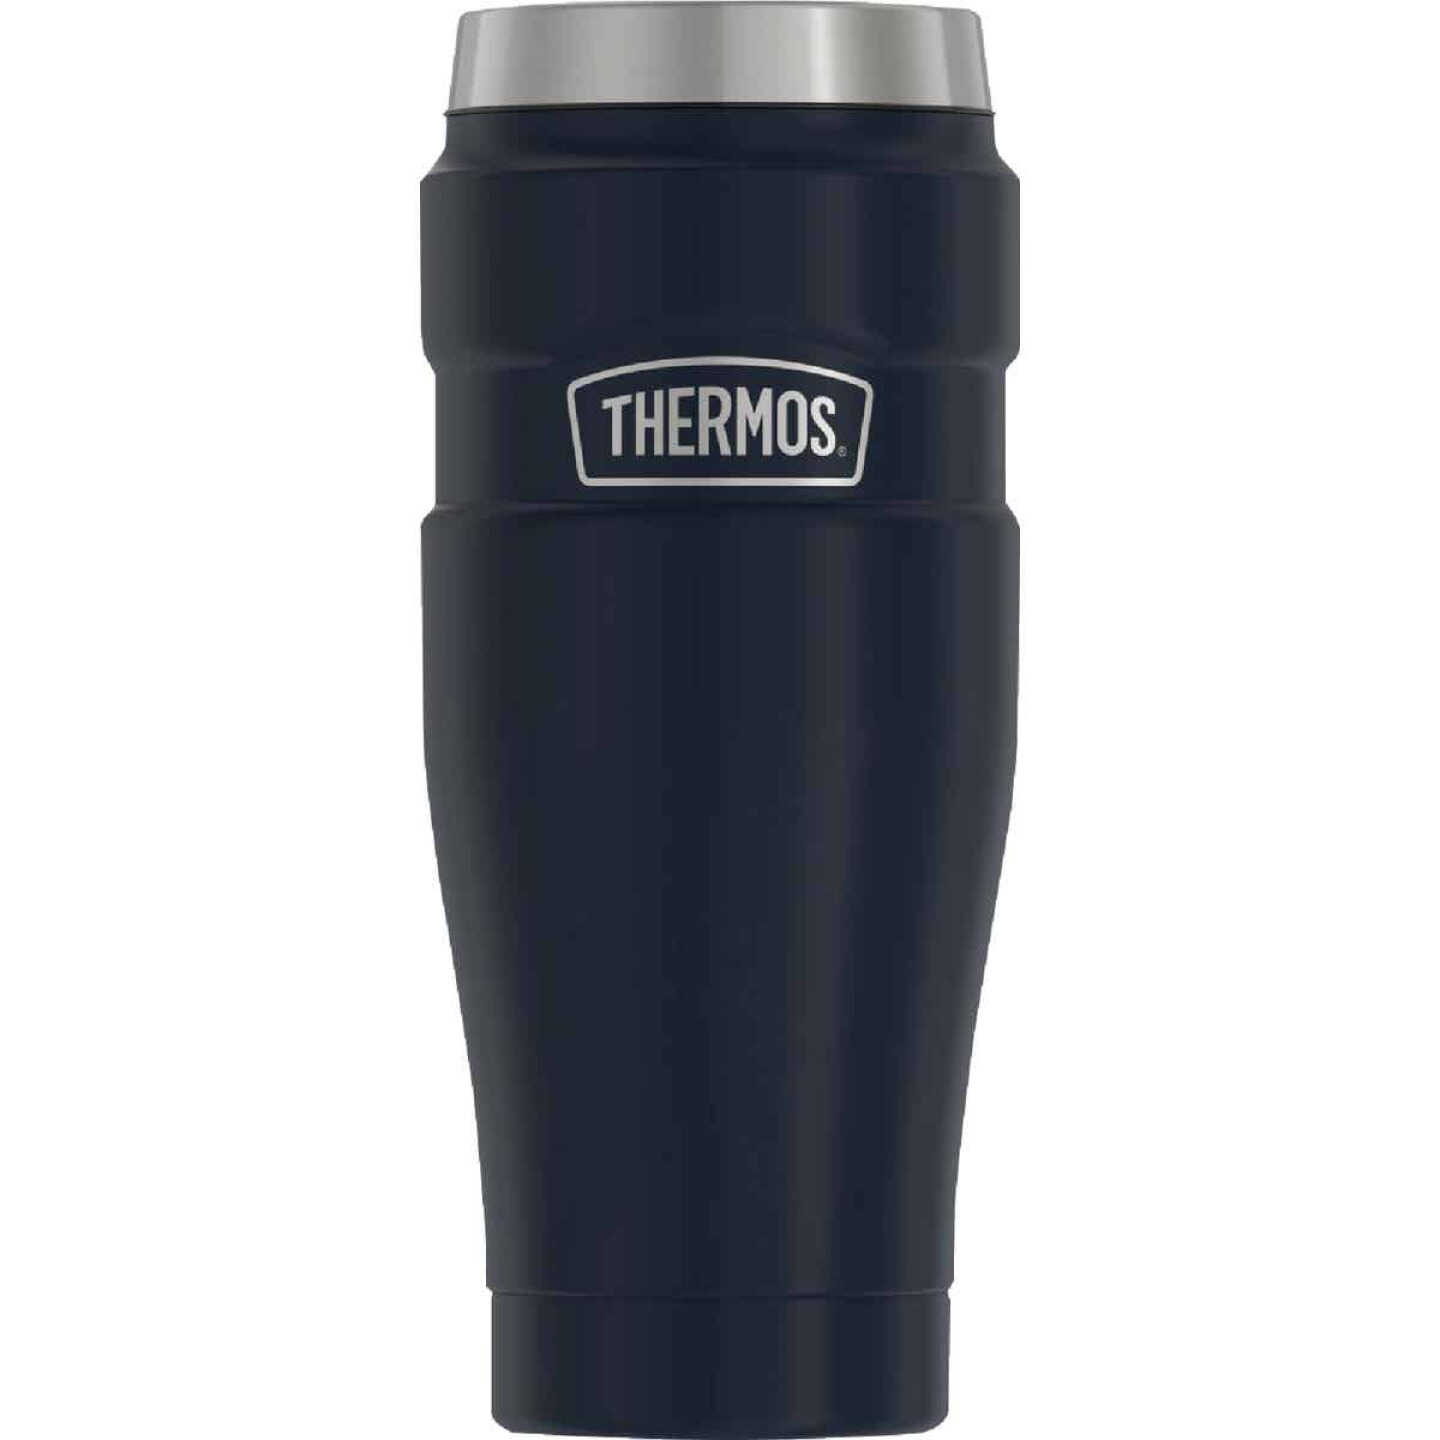 Thermos 16 Oz. Matte Blue Stainless Steel Insulated Travel Tumbler